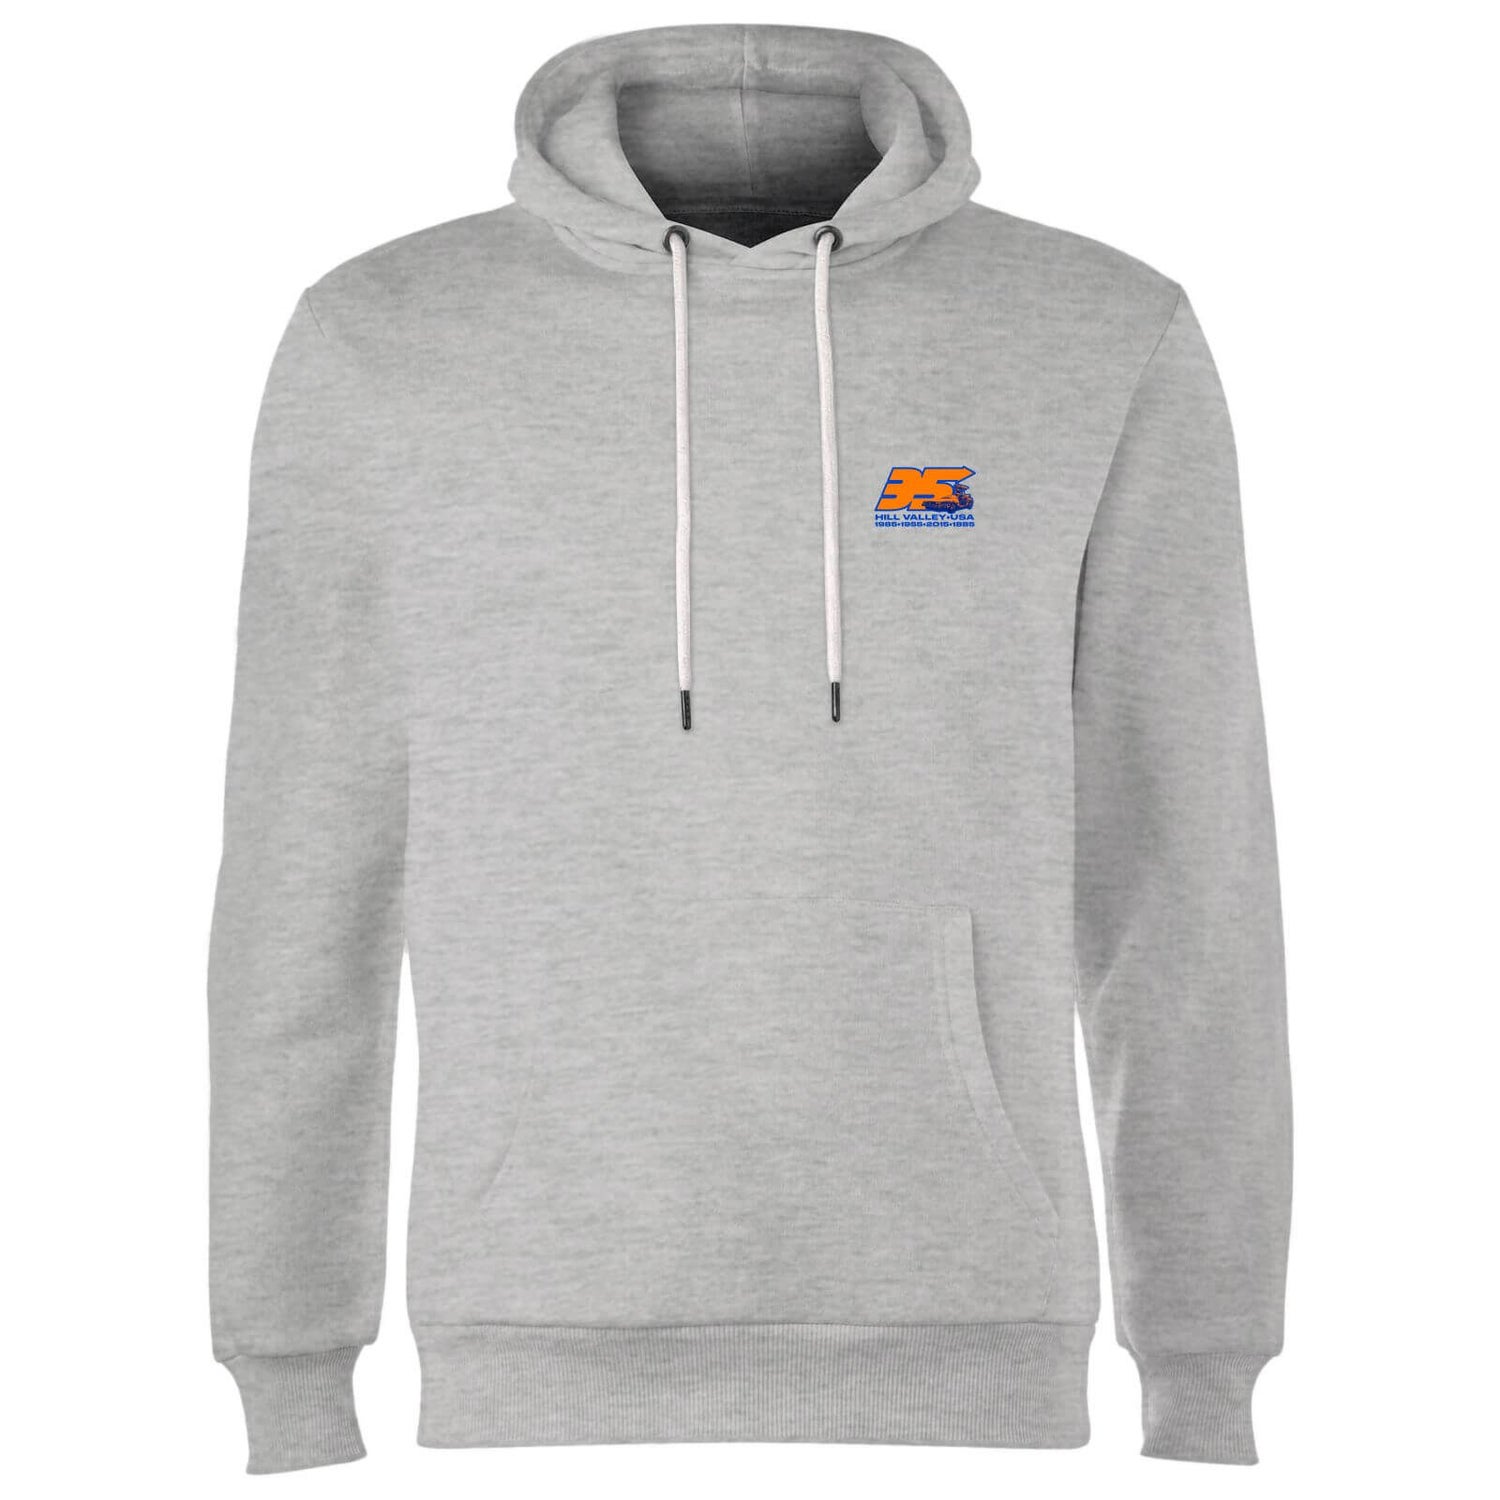 Back To The Future 35 Hill Valley Front Hoodie - Grey